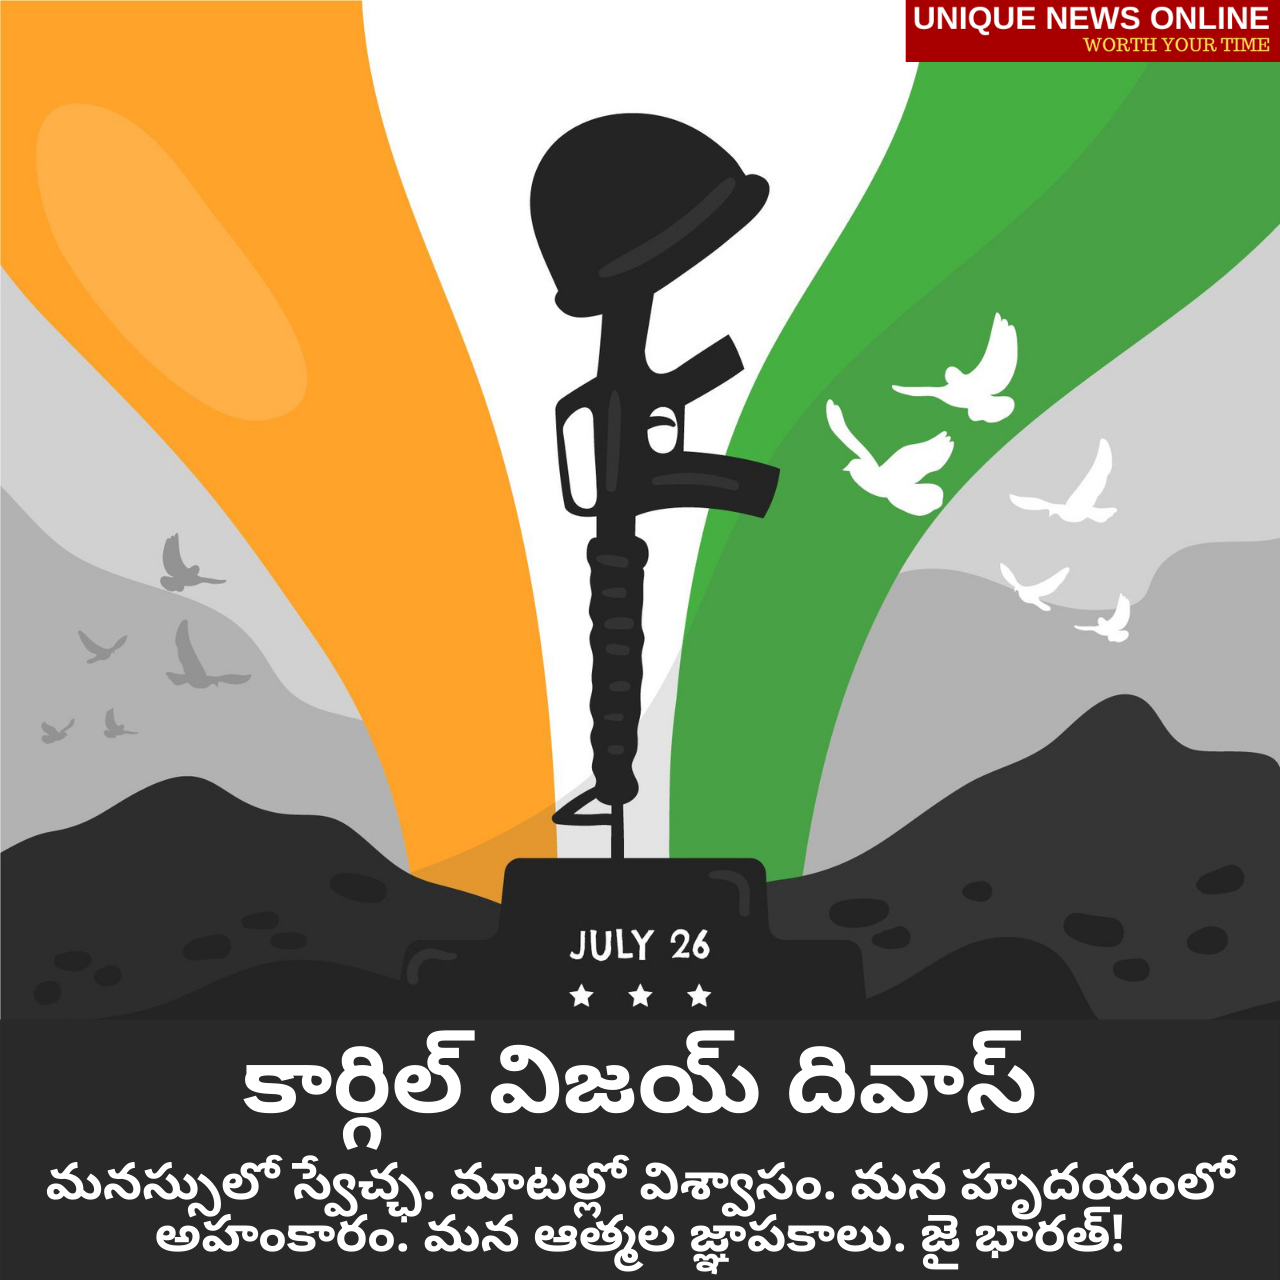 Kargil Vijay Diwas 2021 Telugu and Kannada Quotes, Messages, Wishes, Greetings, Status, and HD Images to honour Brave Indian Soldiers of the Kargil War